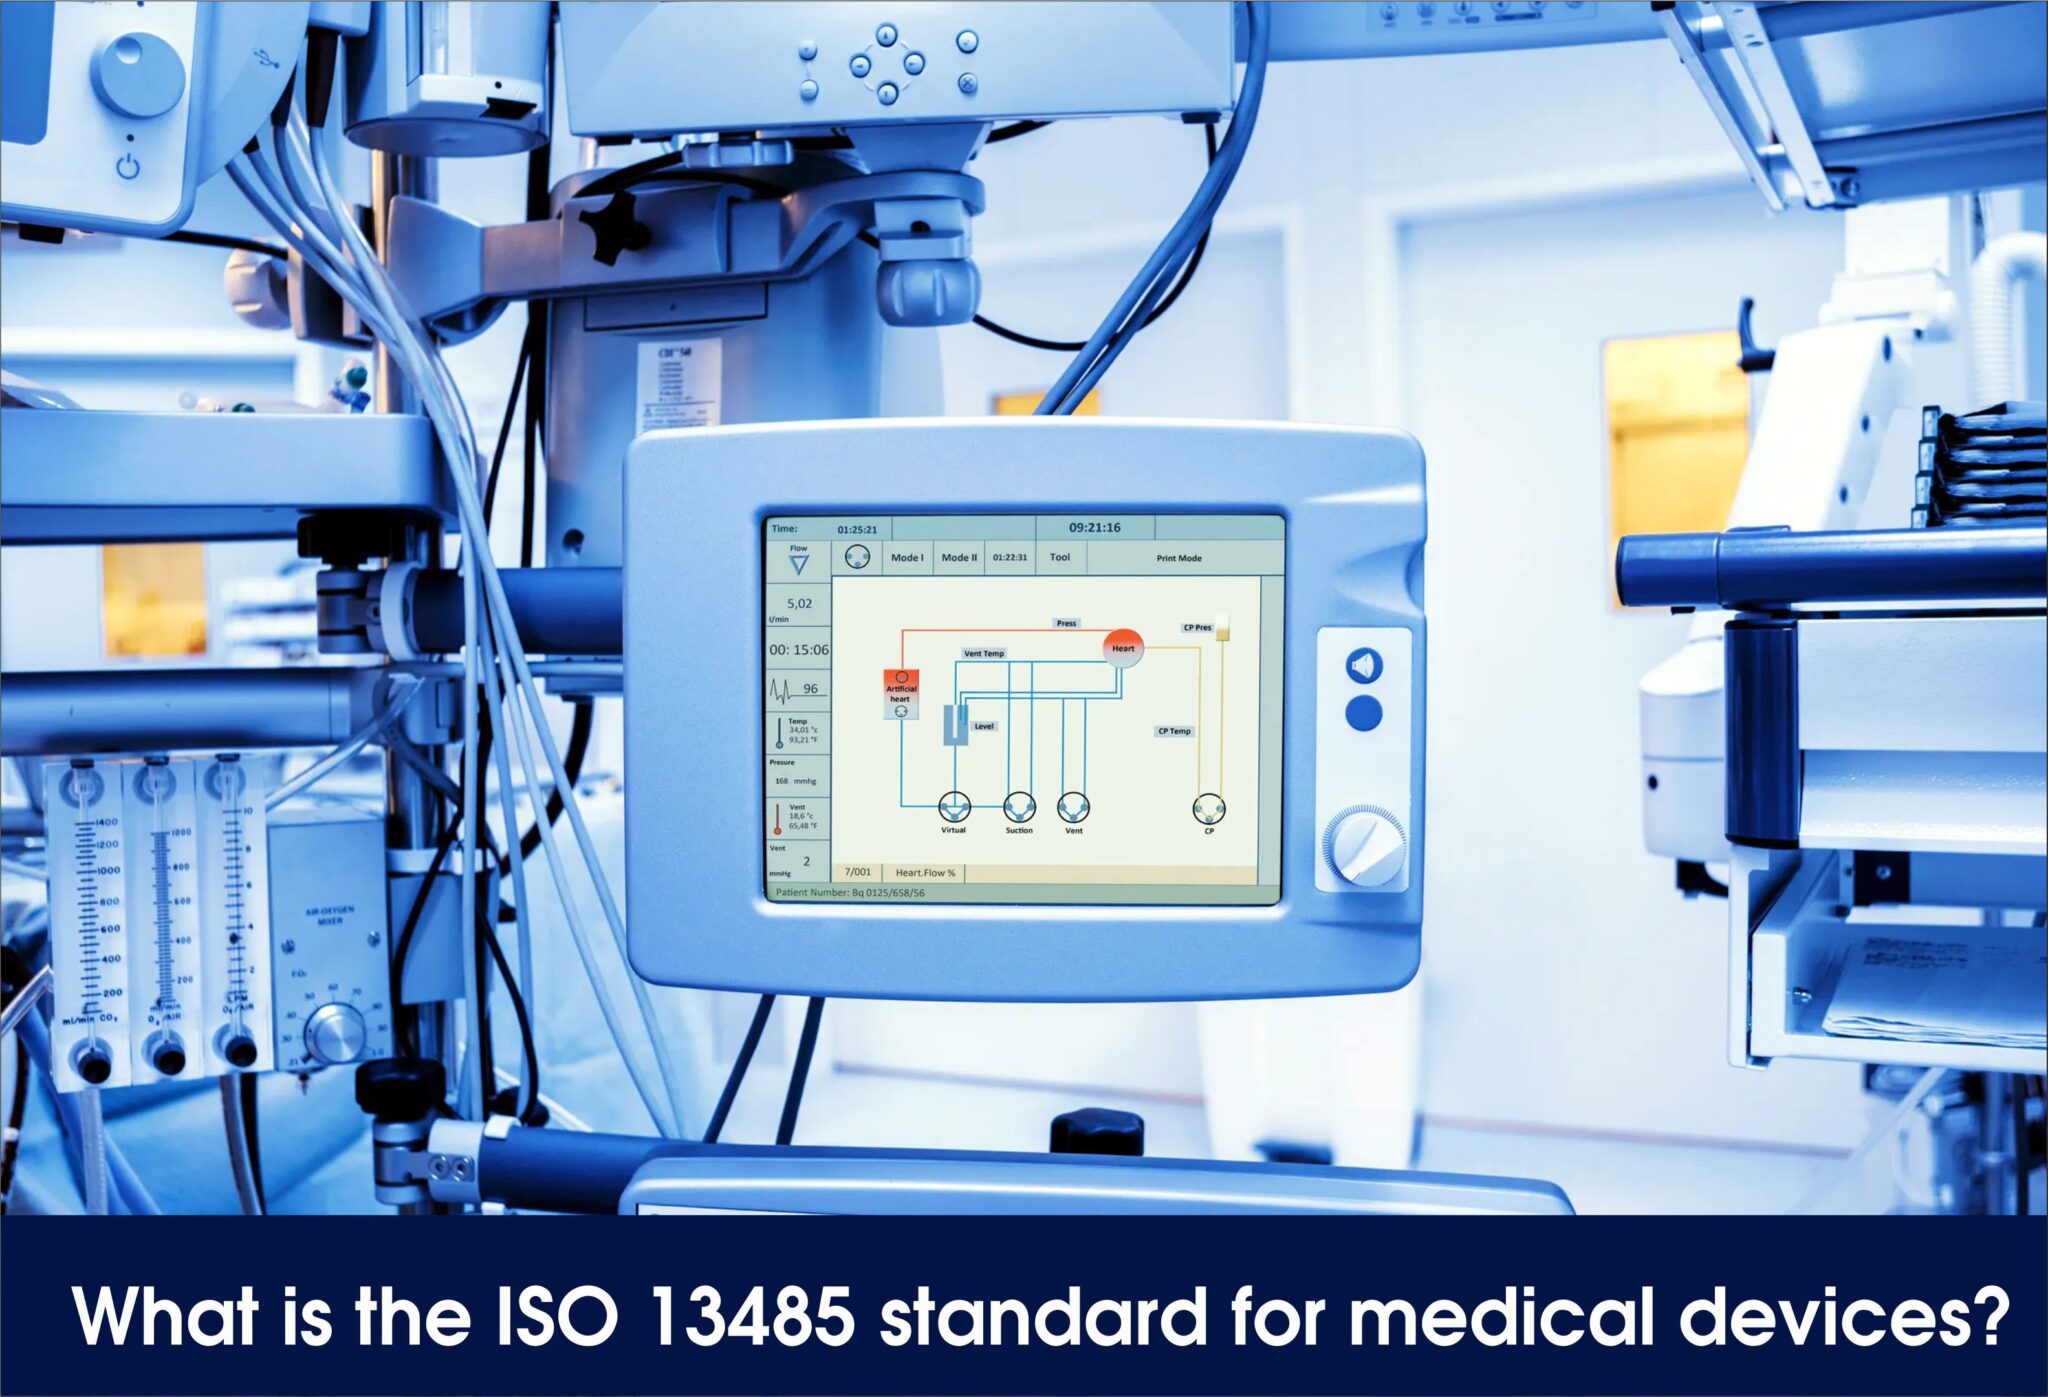 What is the ISO 13485 standard for medical devices?